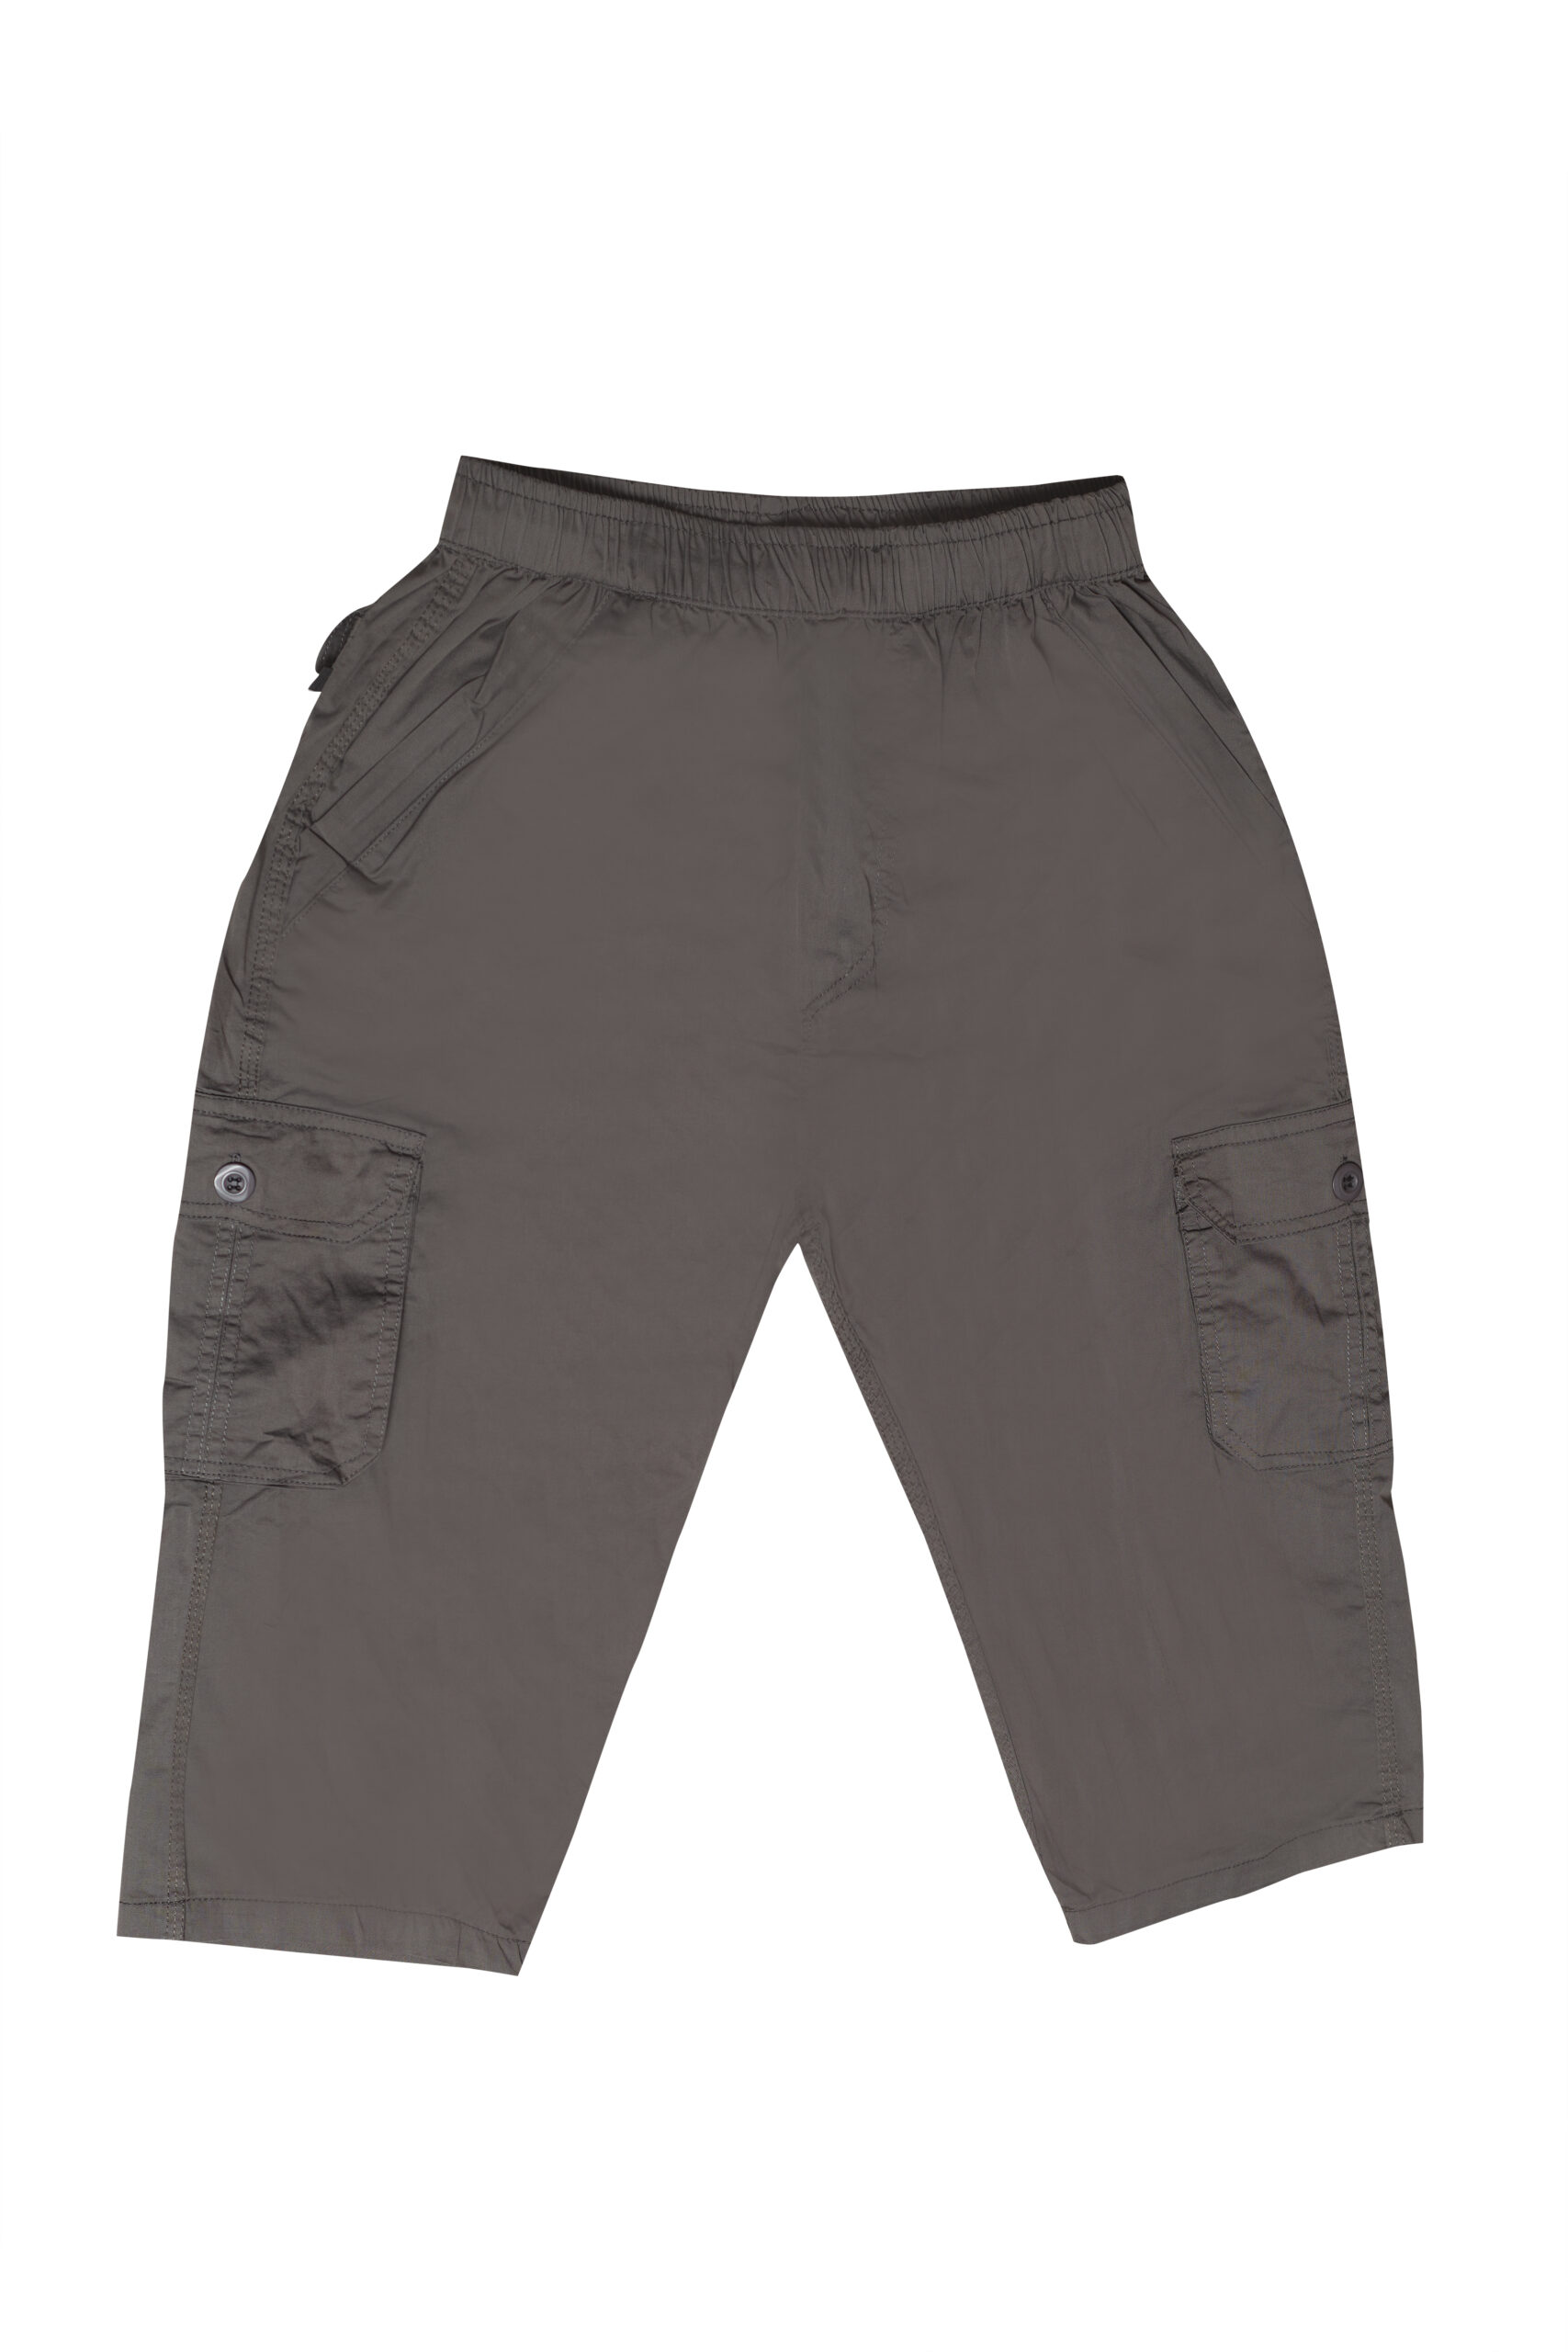 Mens Capri Pants In Ludhiana - Prices, Manufacturers & Suppliers